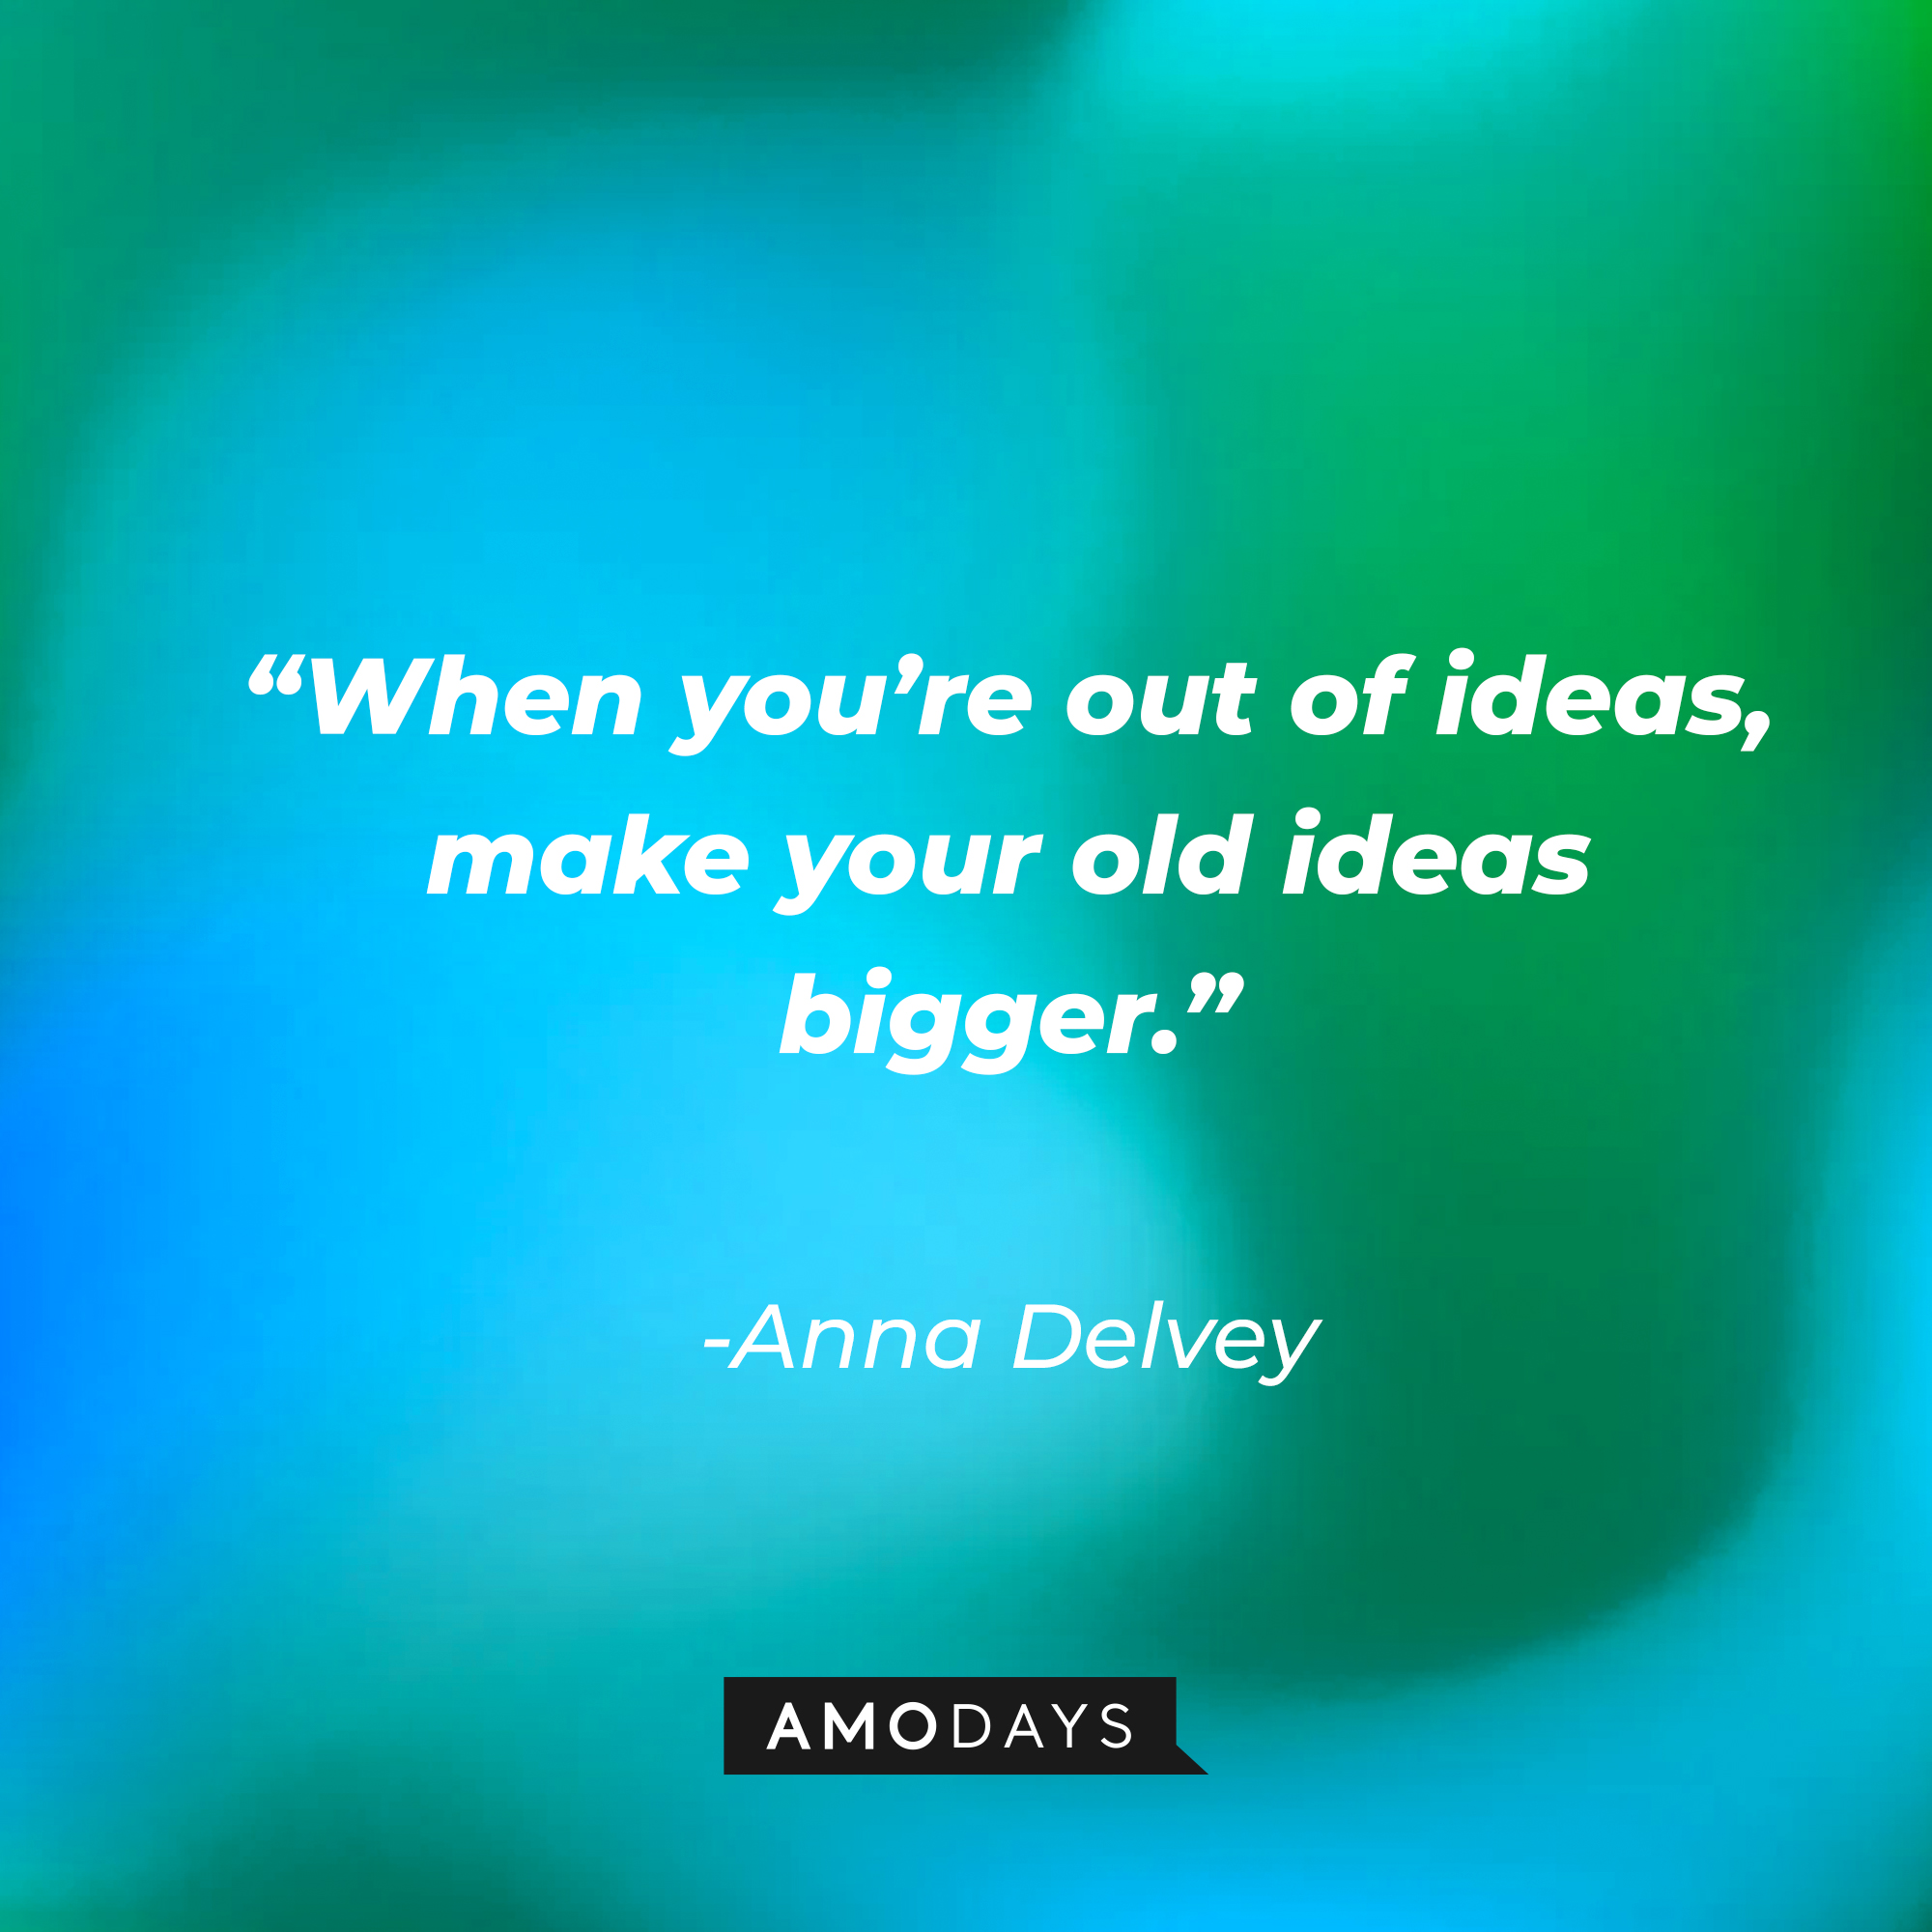 Julia Garner’s portrayal/version of Anna Delvey’s quote: “When you’re out of ideas, make your old ideas bigger.”  | Source: AmoDays